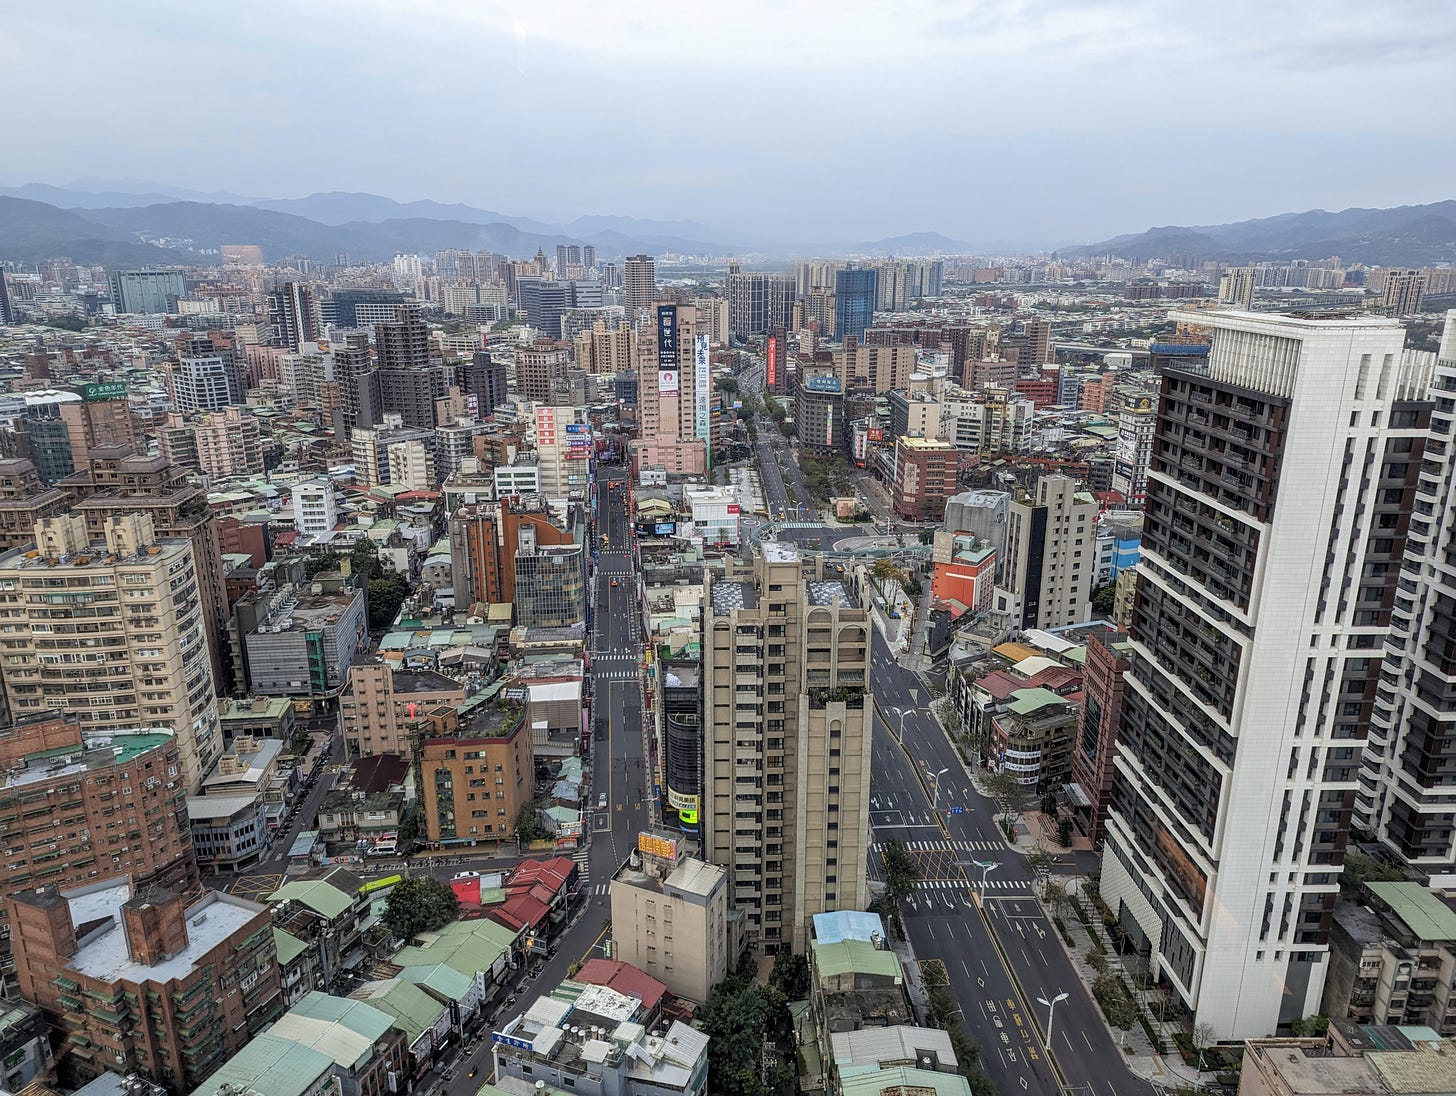 cityscape with tall buildings and roads as seen from another tall building with mountains in the distance